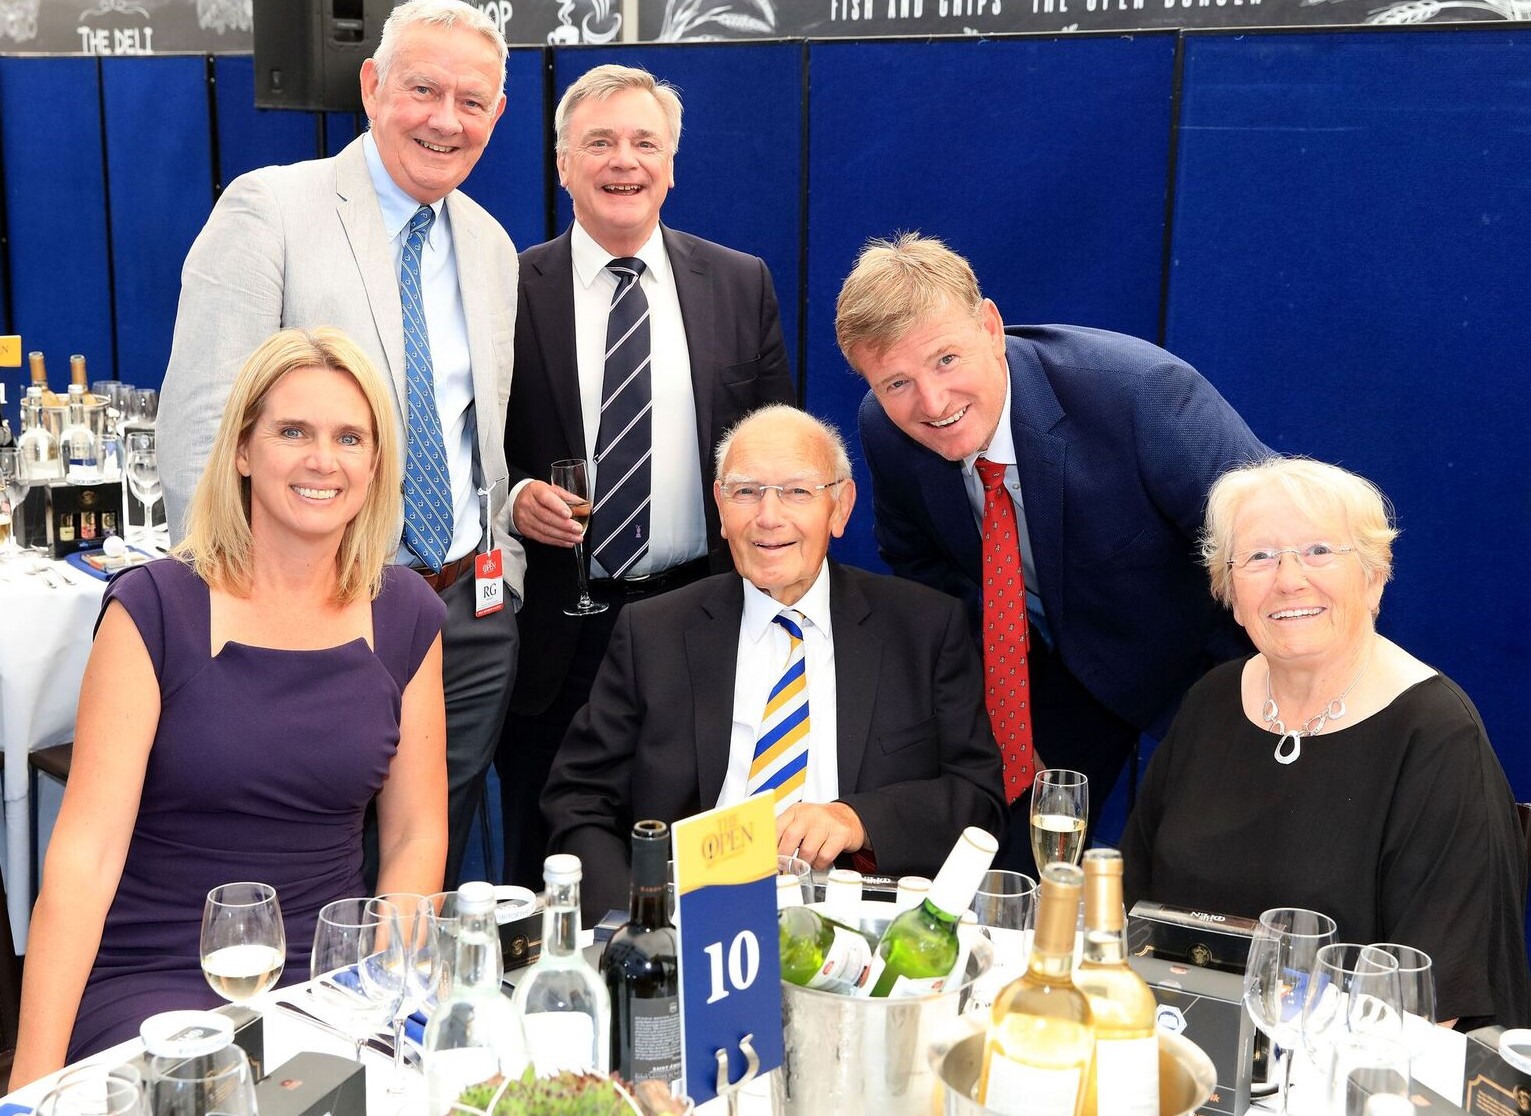 Ernie Els and his wife join Renton Laidlaw at his table and with Renton's sister, Jennifer proudly by Renton's side. (Photo with thanks to David Cannon)